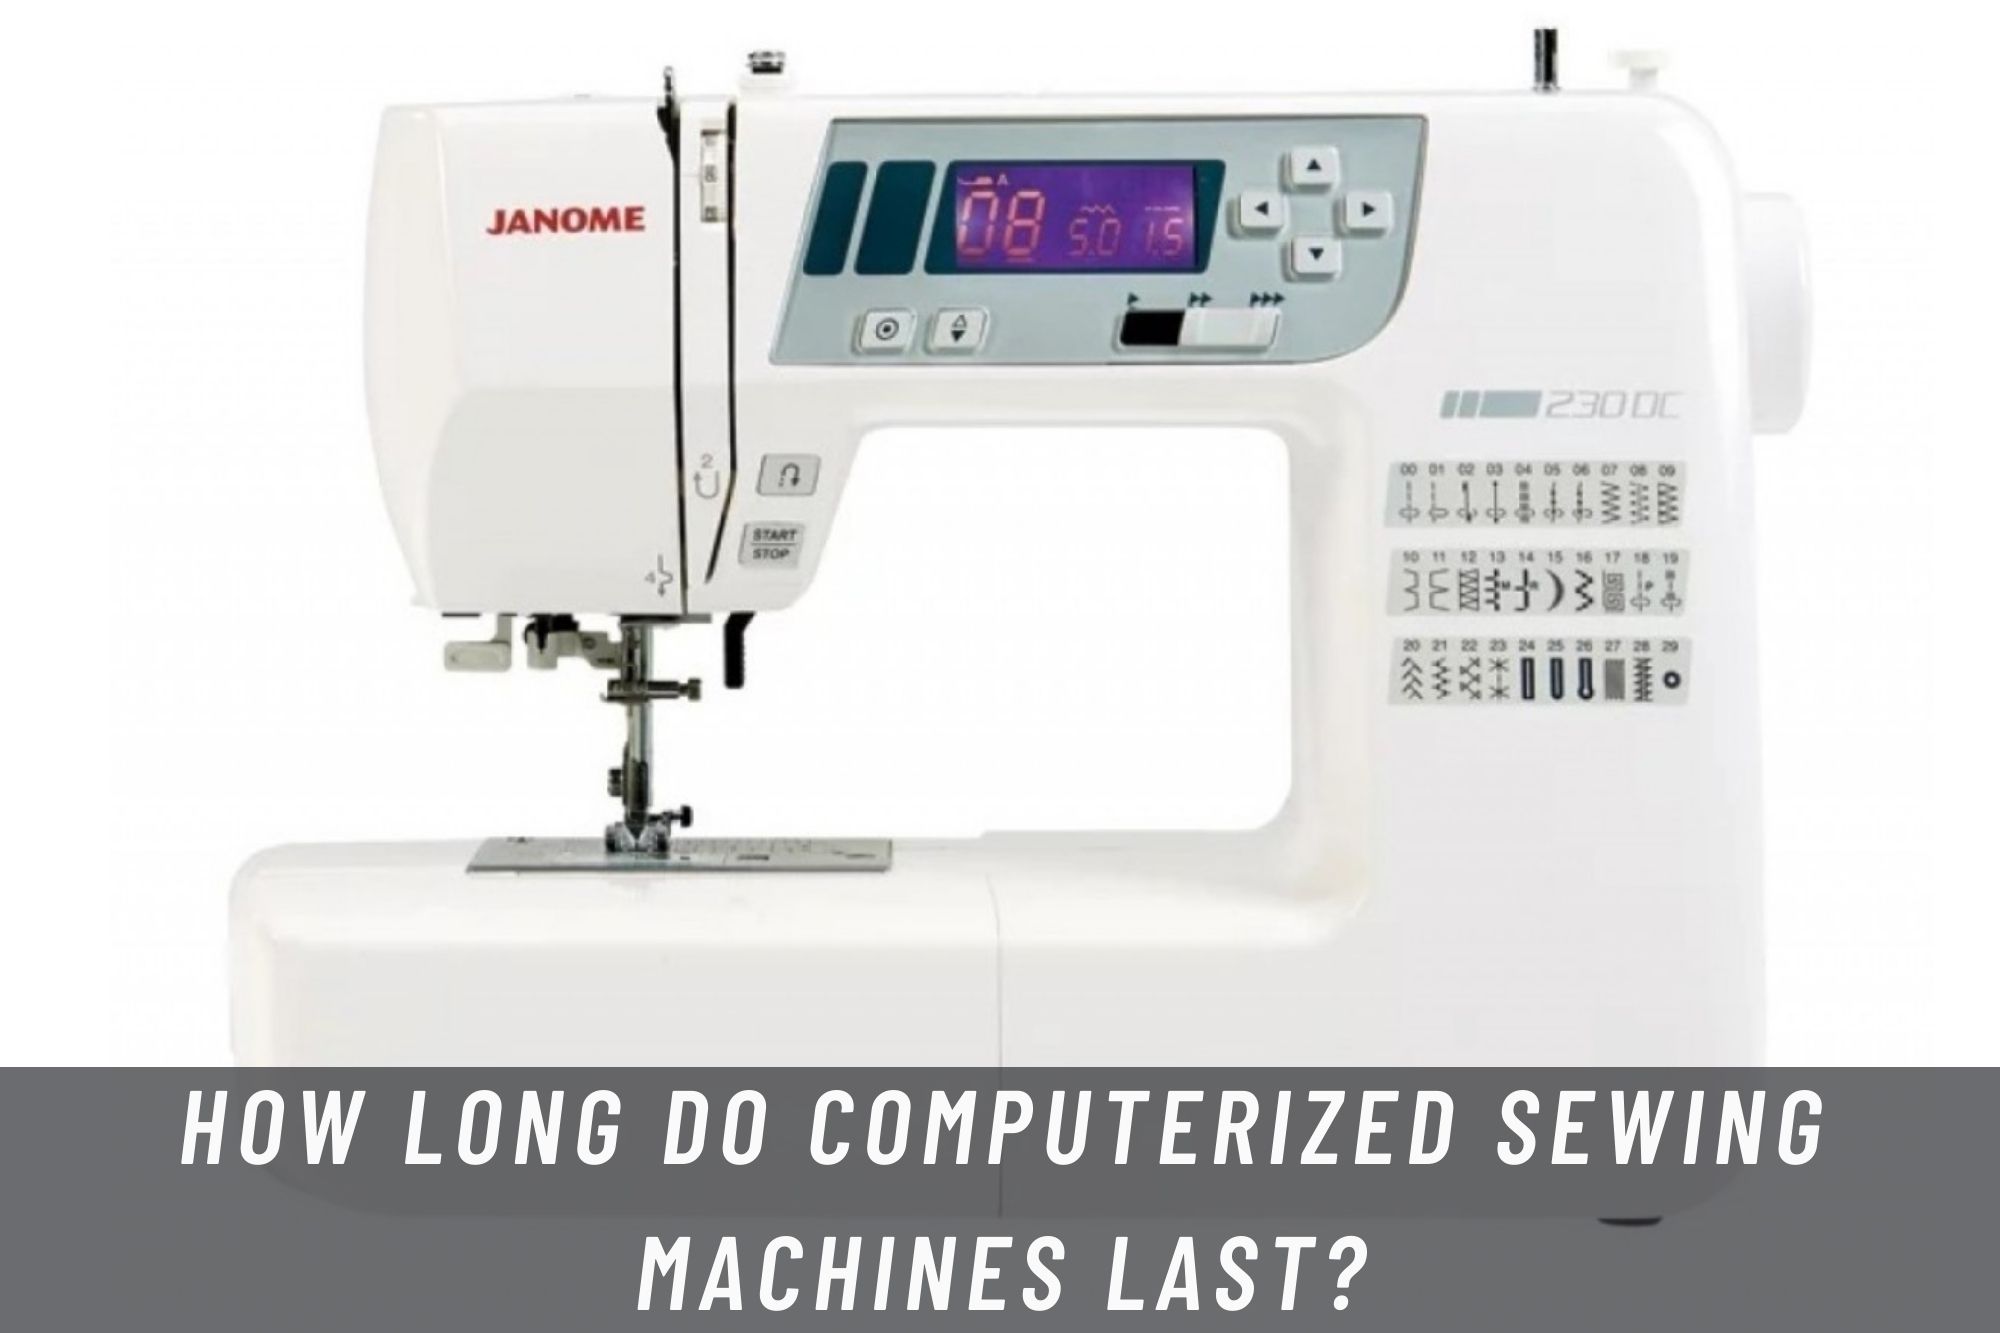 How Long Do Computerized Sewing Machines Last?